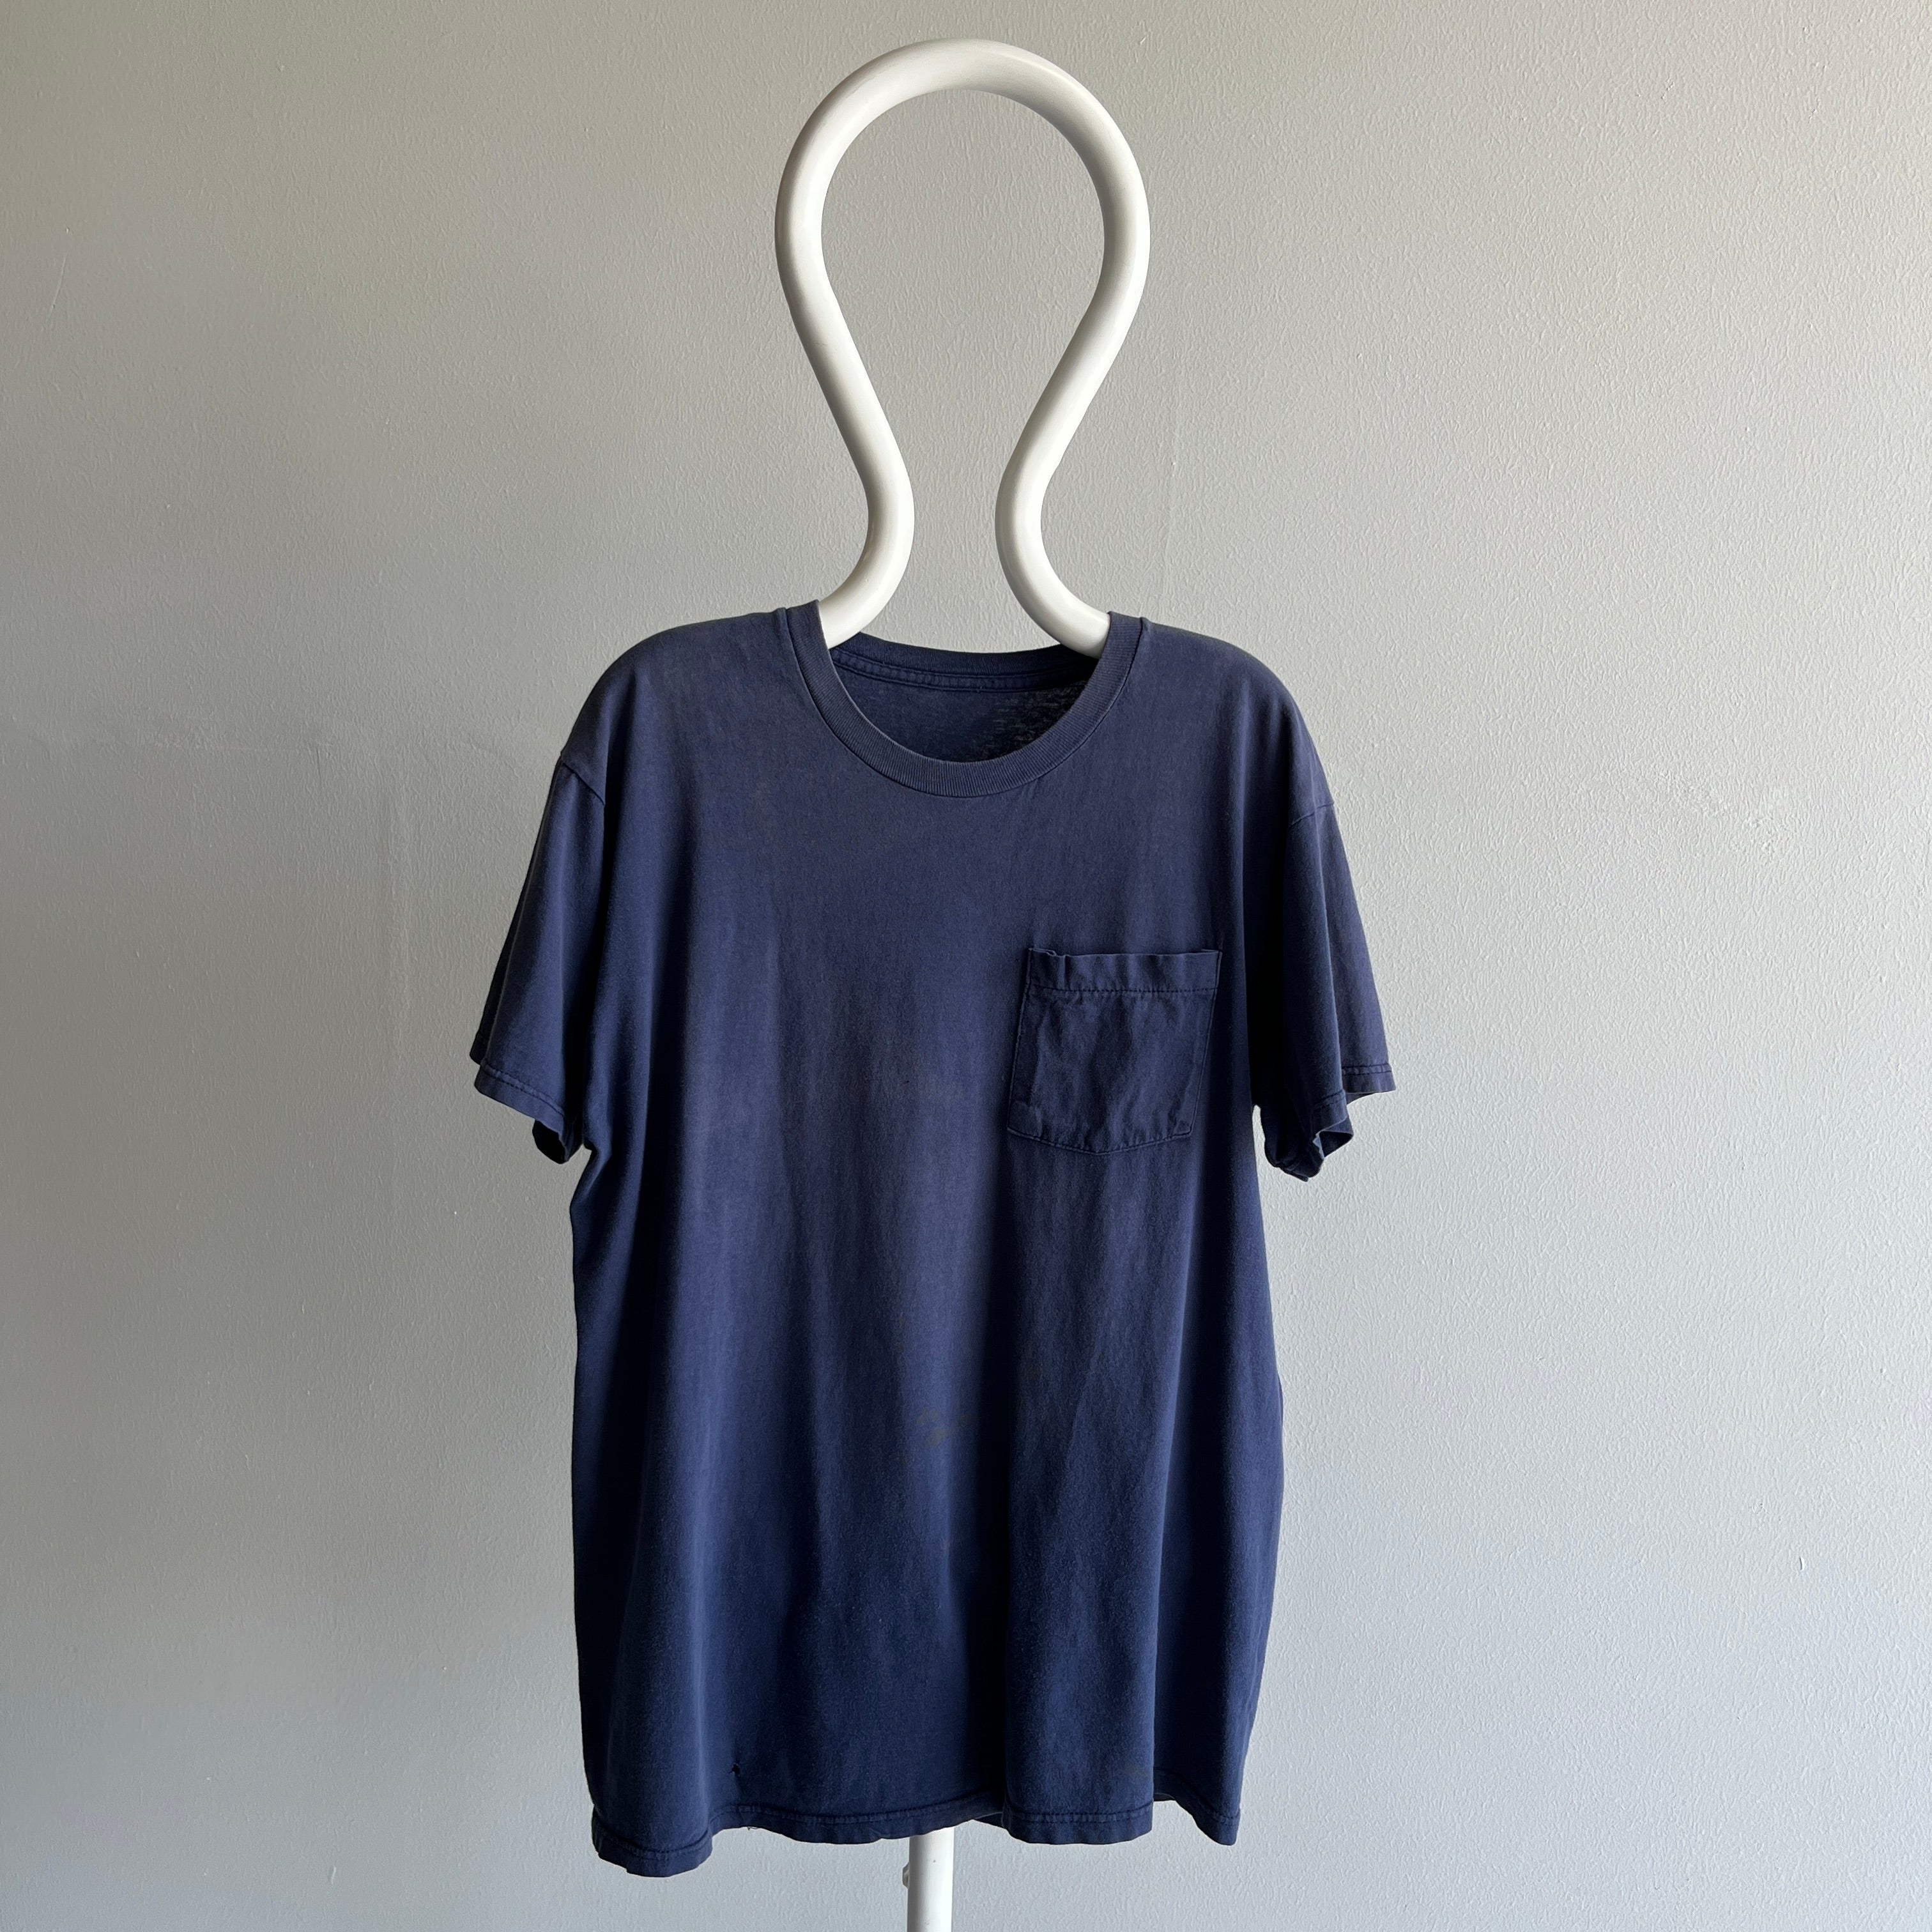 1980 Faded and Worn Navy Cotton Pocket T-Shirt